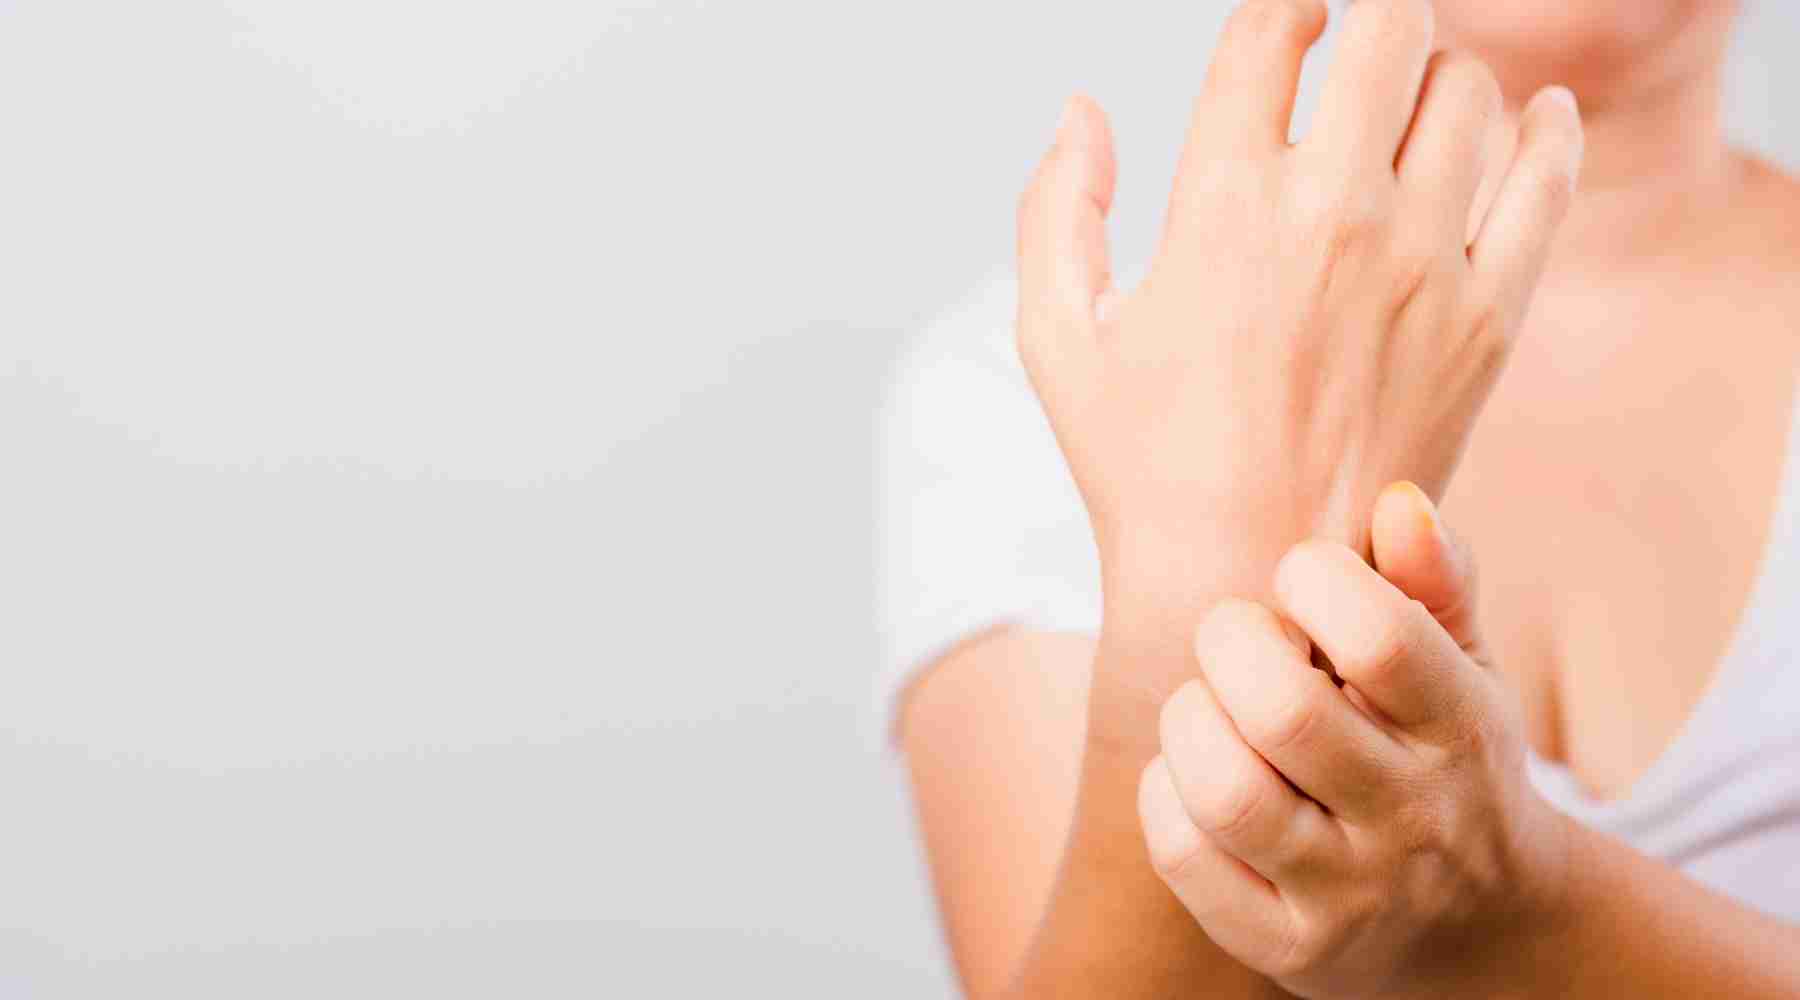 Right Hand Itching: What Does It Mean?